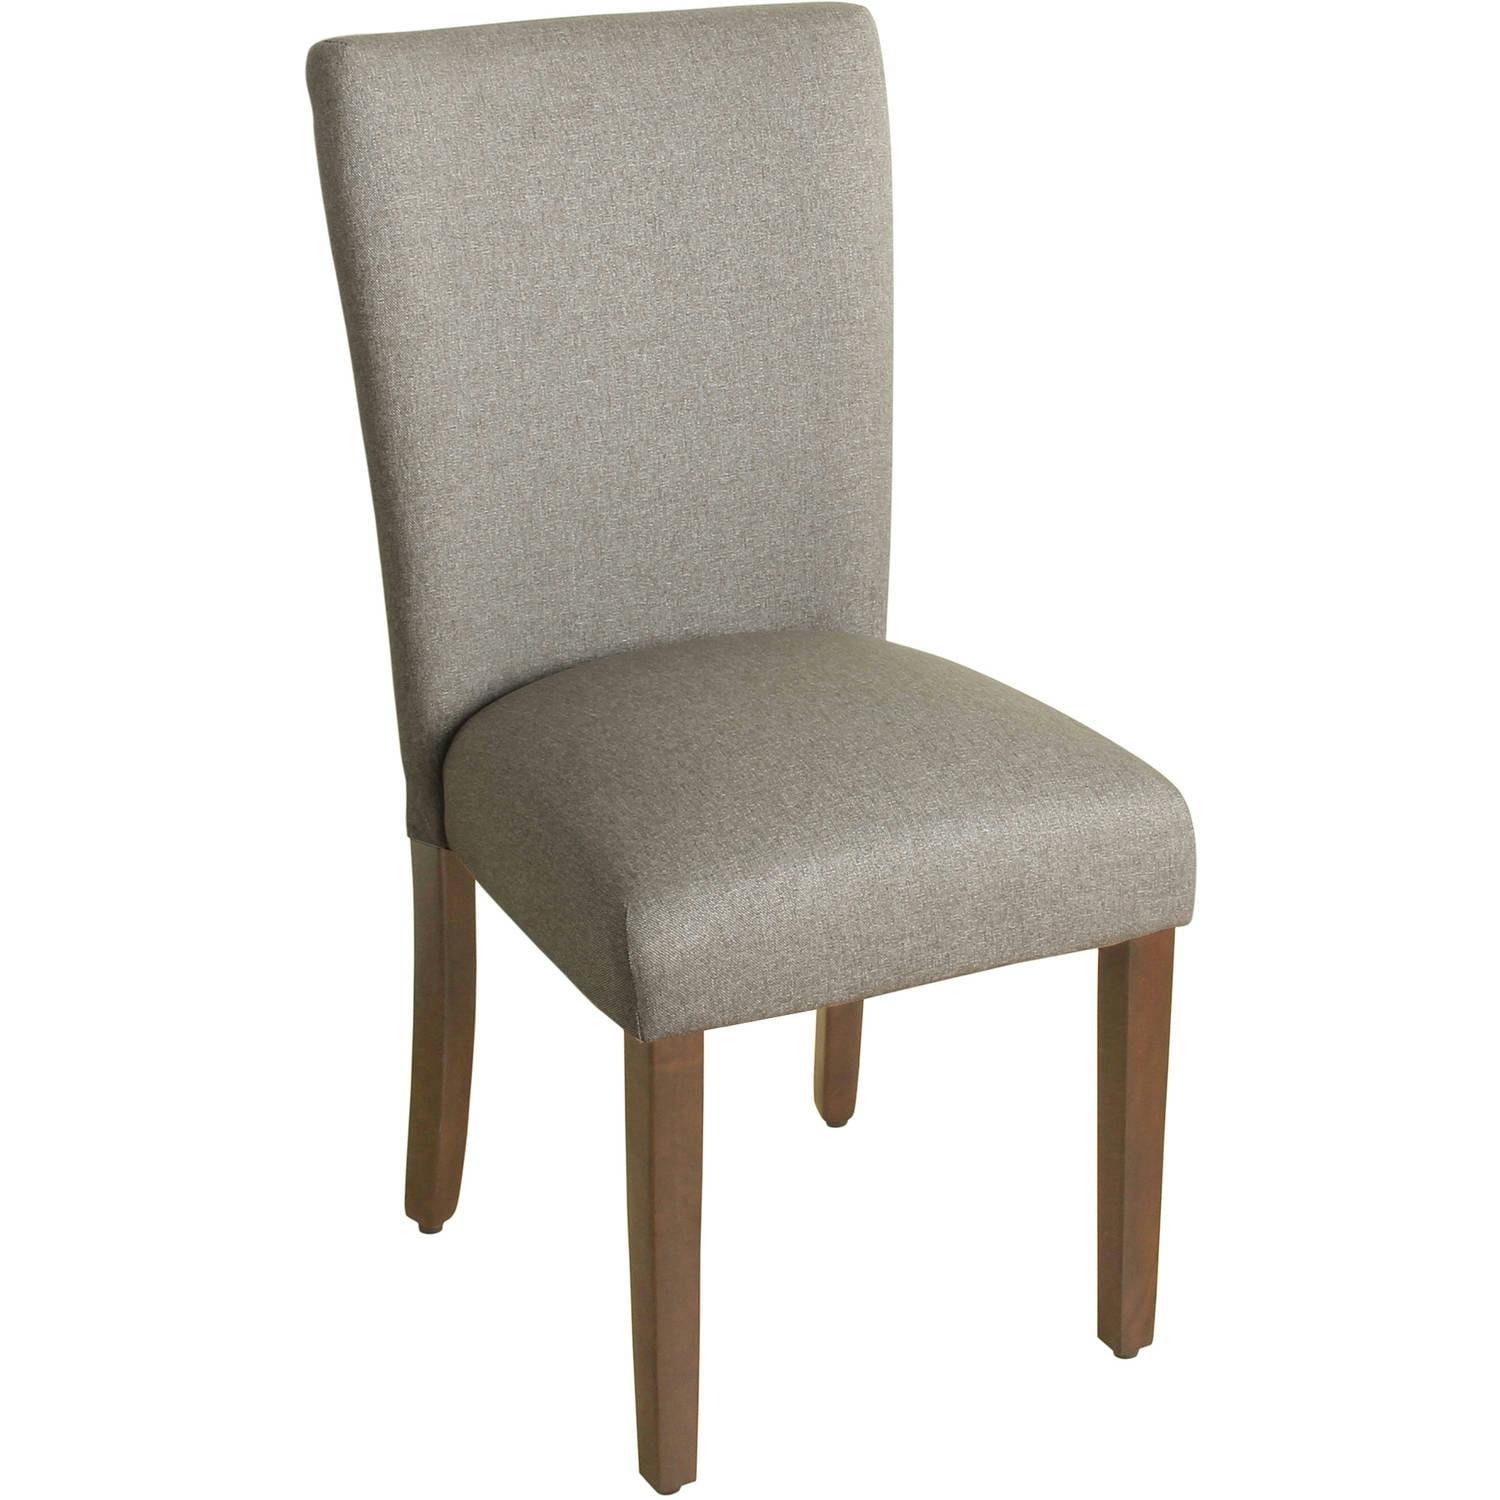 Classic Gray Parsons Upholstered Side Chair with Wood Legs